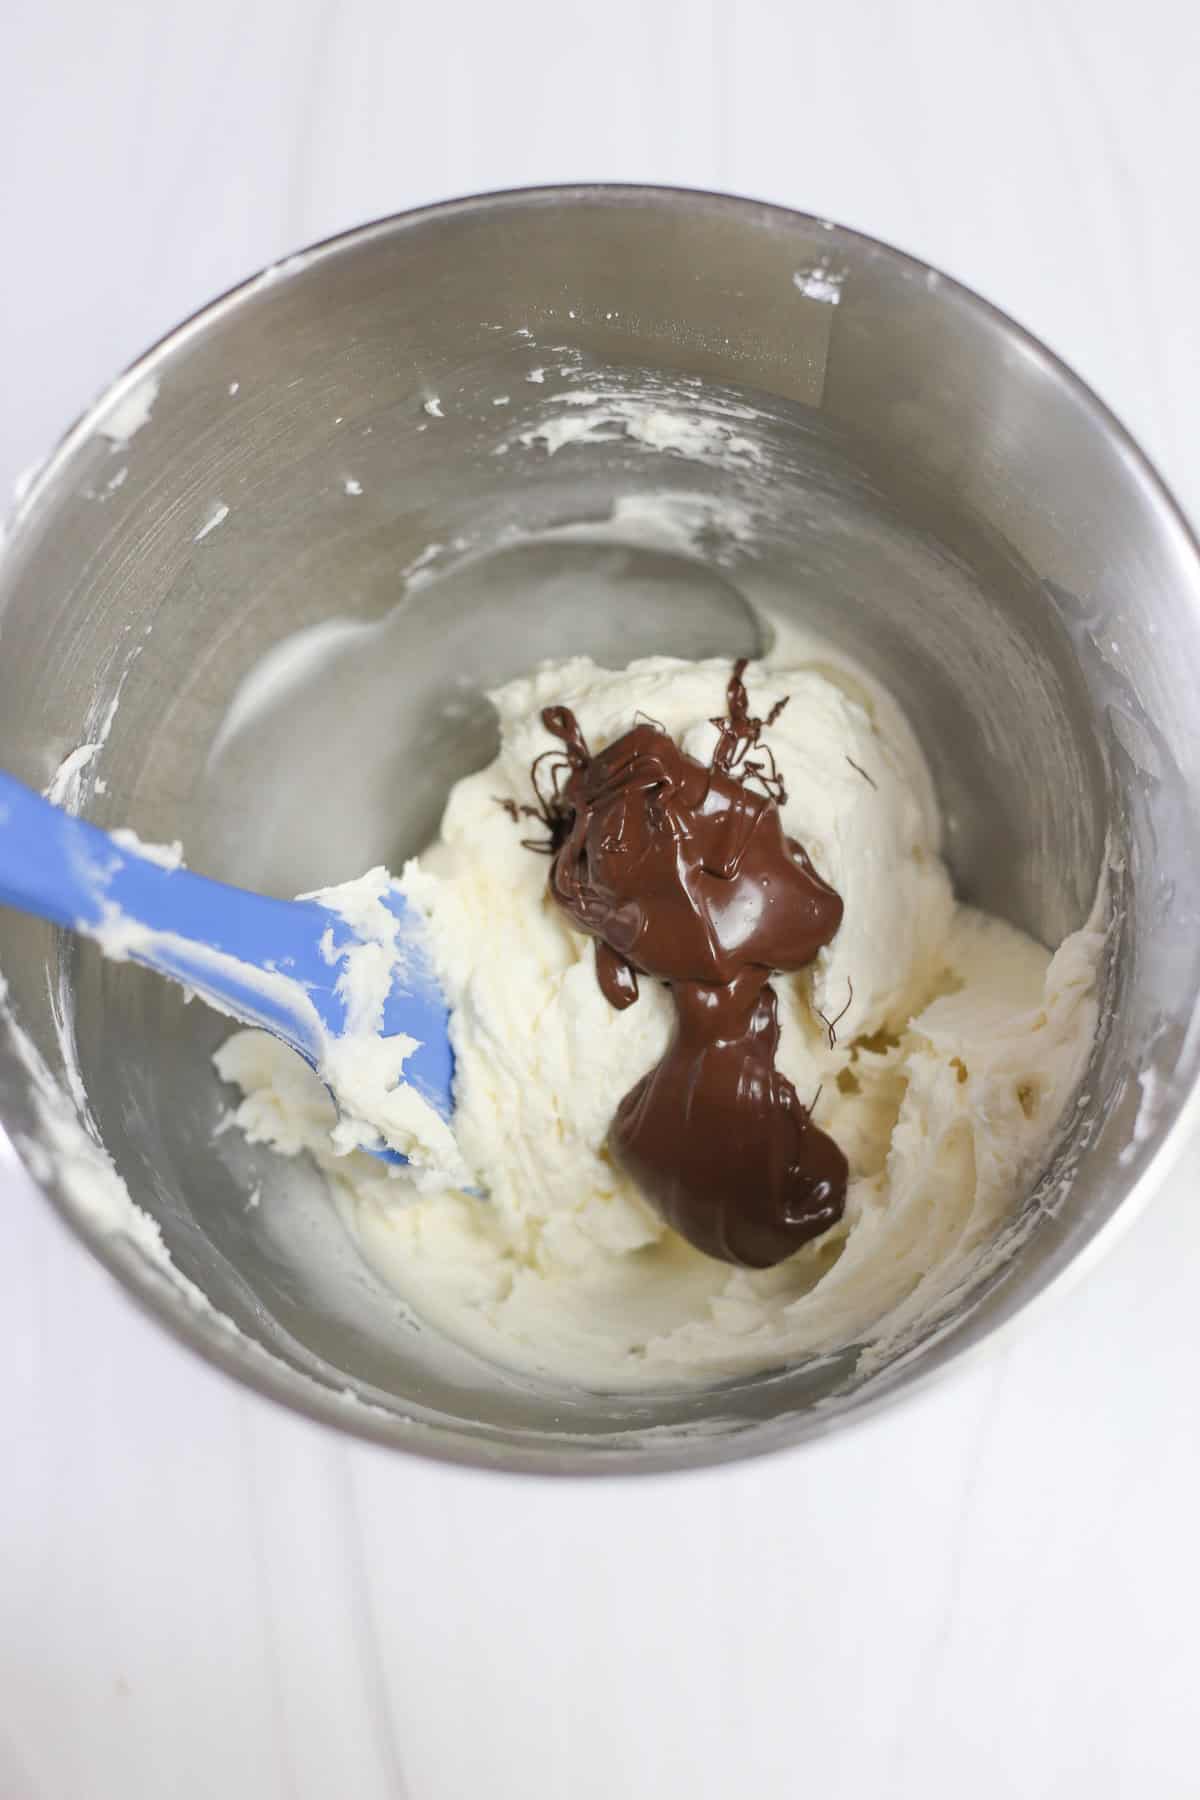 Melted chocolate chips being mixed into buttercream frosting.